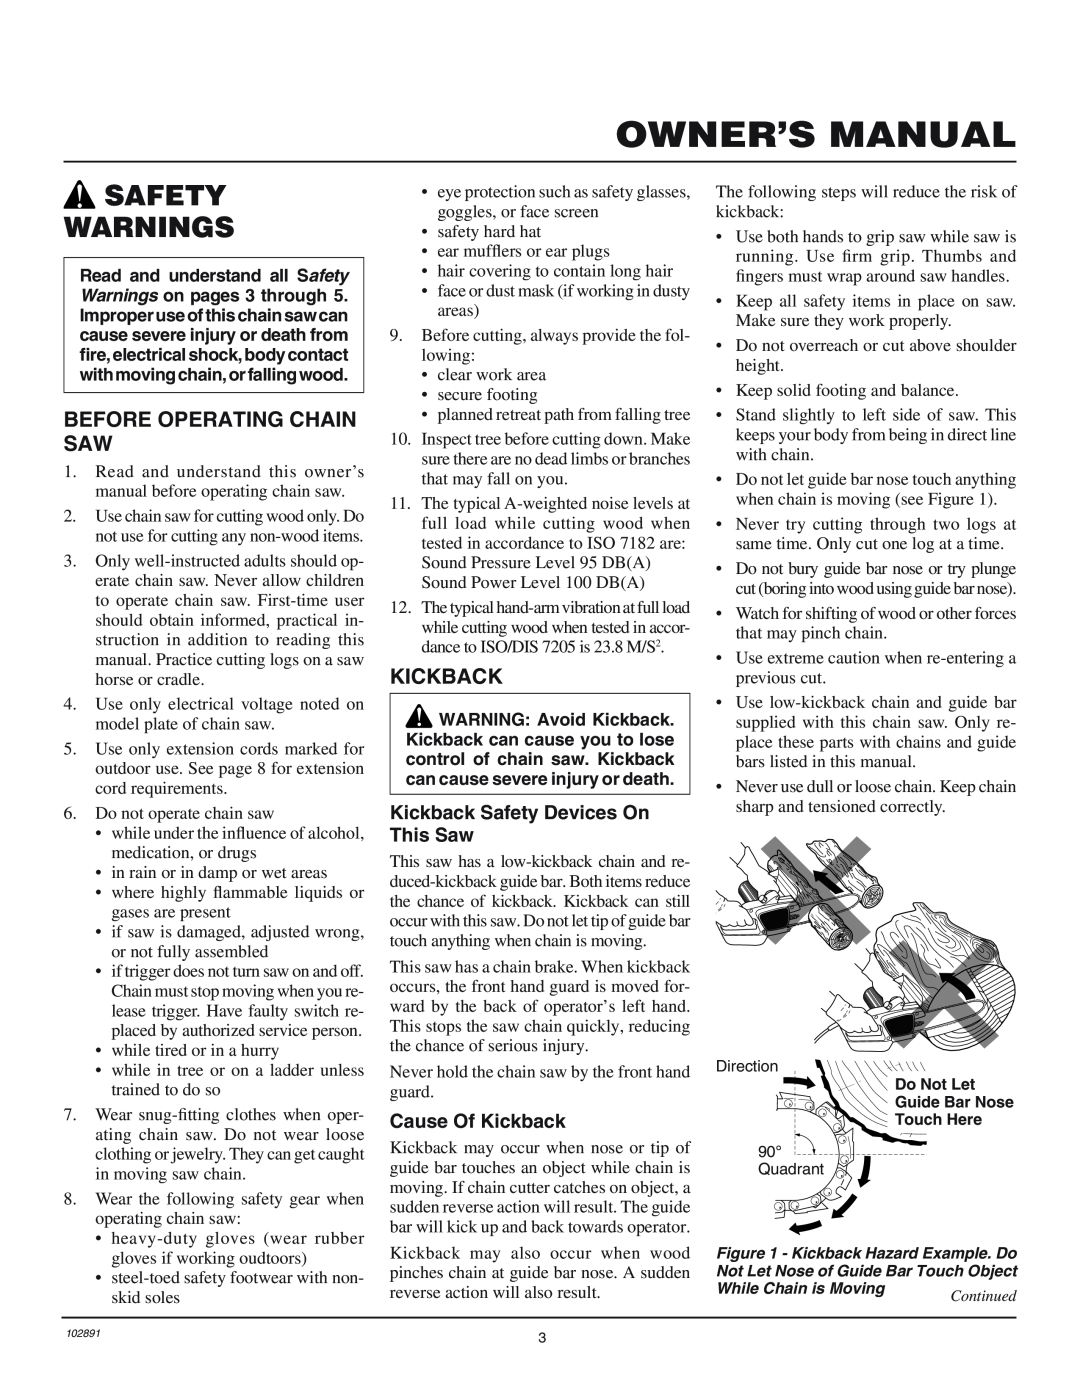 Desa 100271-01 Owner’S Manual, Safety Warnings, Before Operating Chain Saw, Kickback Safety Devices On This Saw 